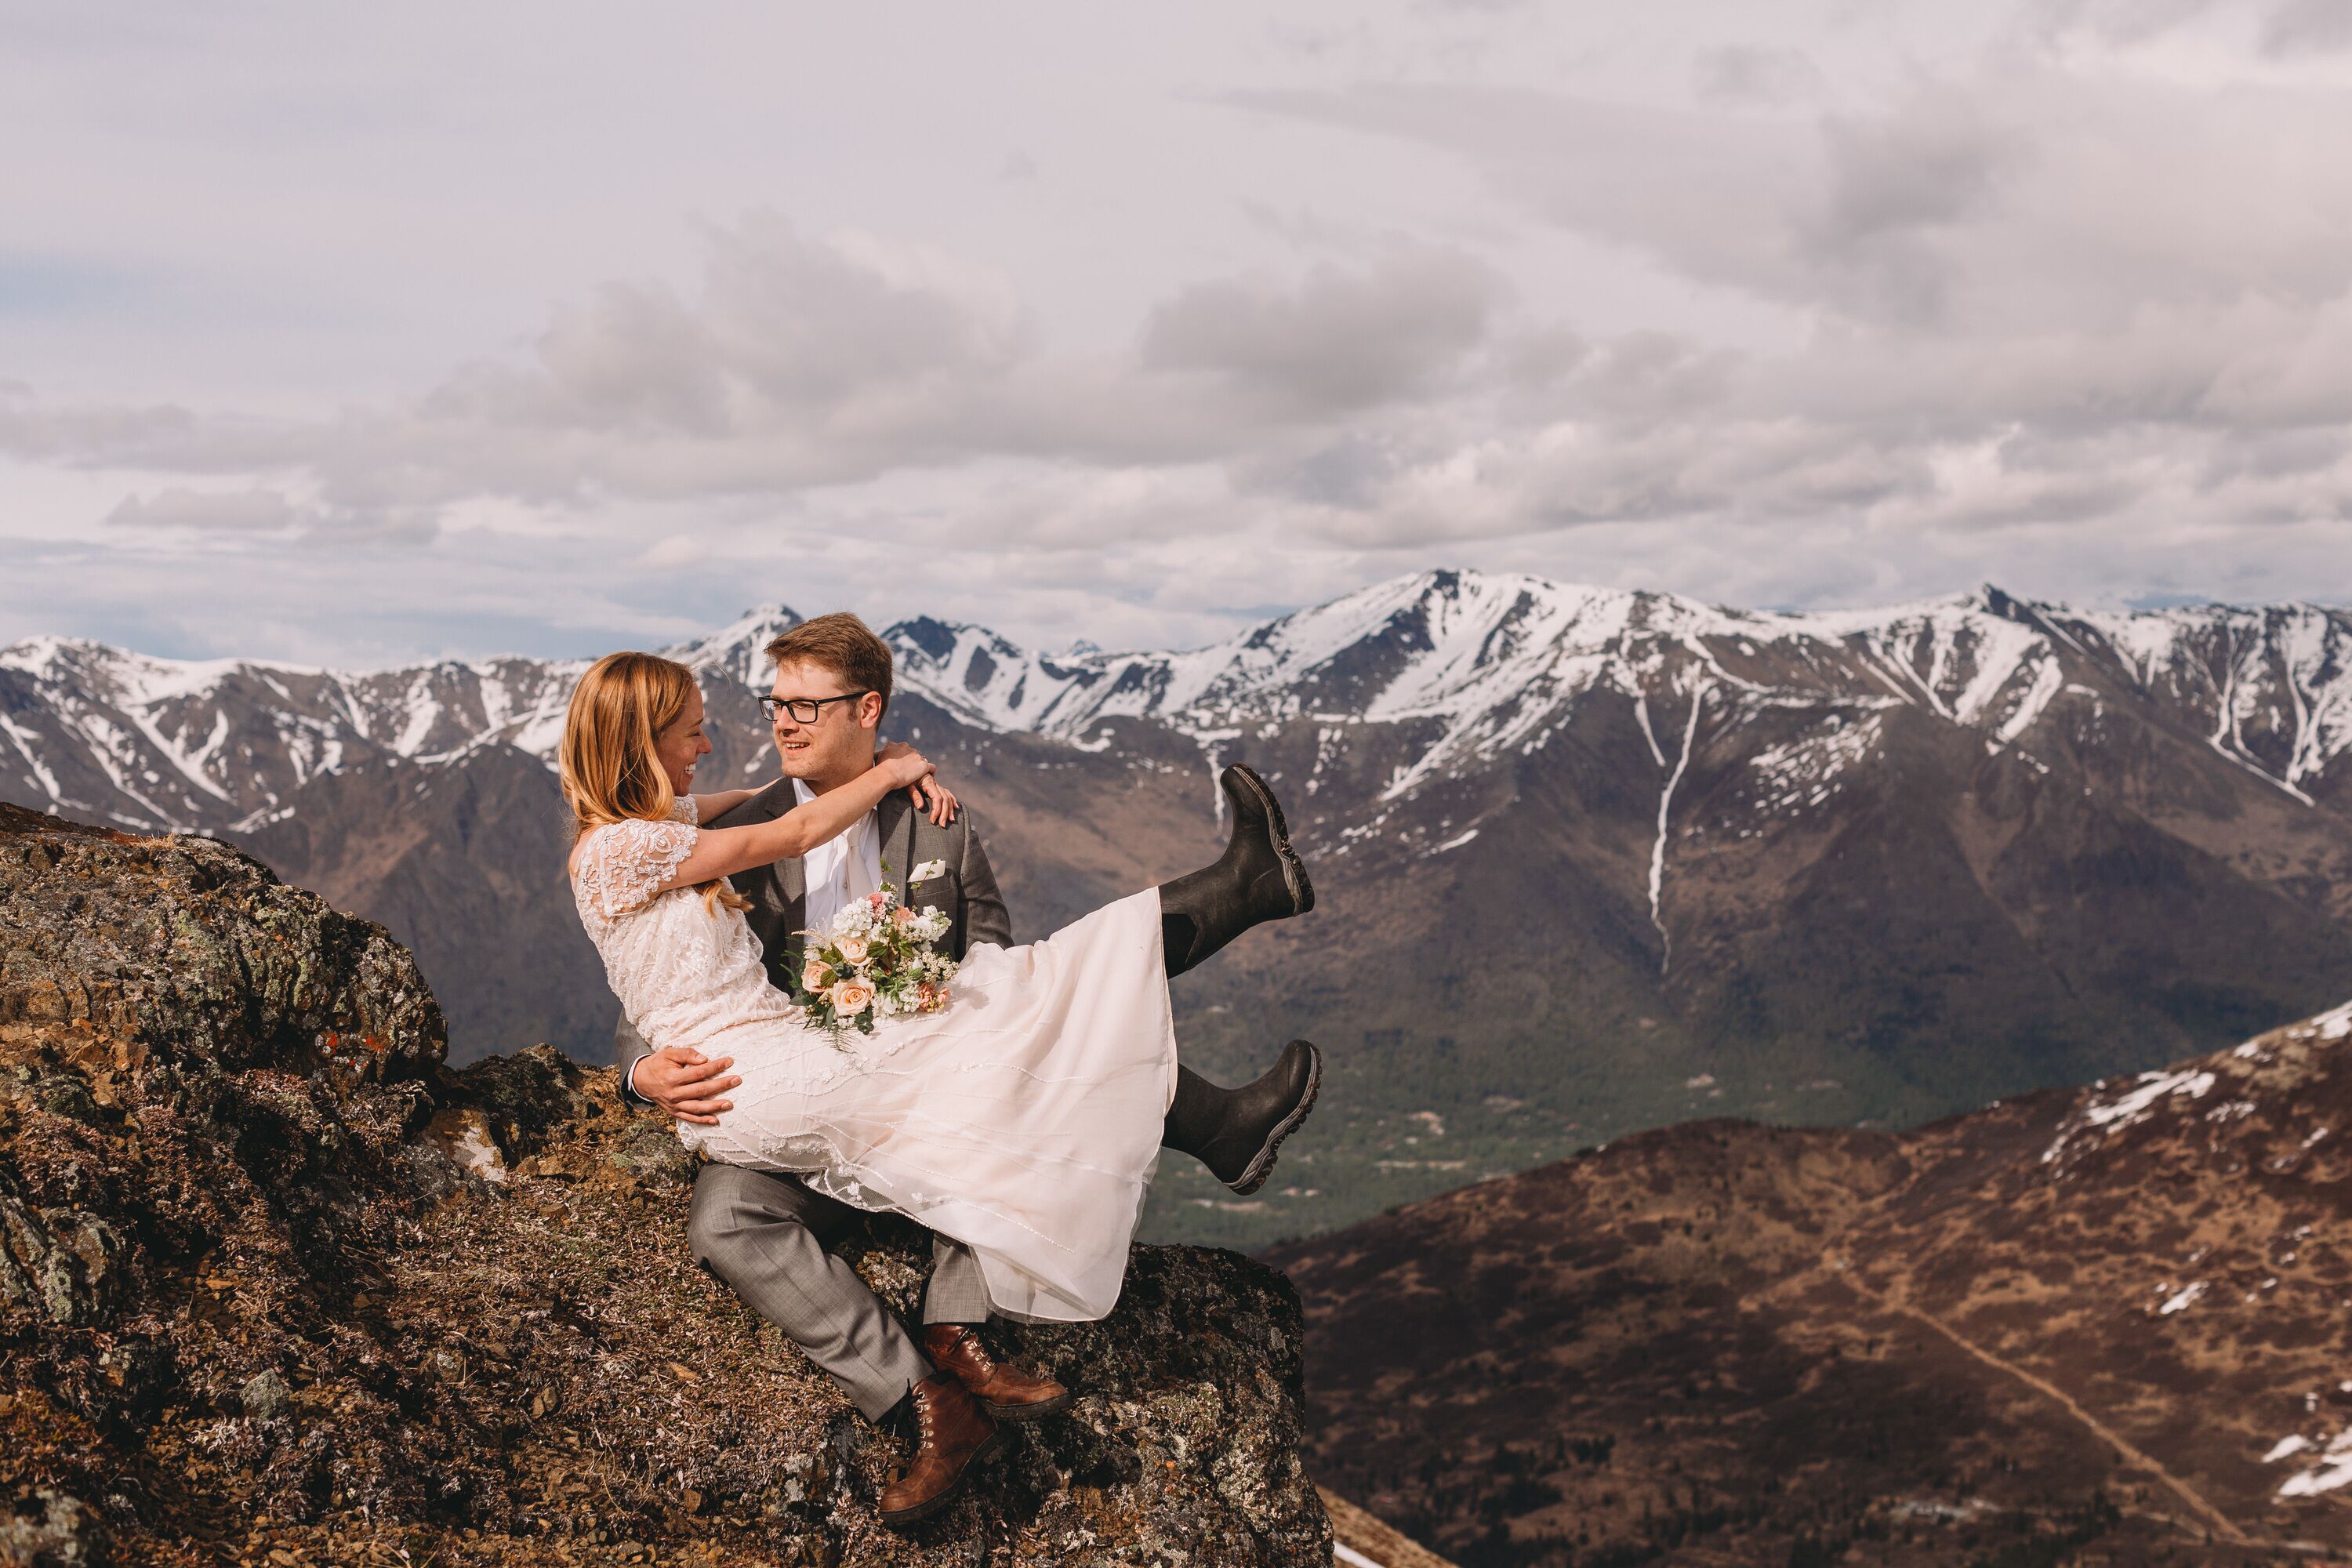 A Rustic Mountaintop Wedding  at Alpenglow Lodge in 